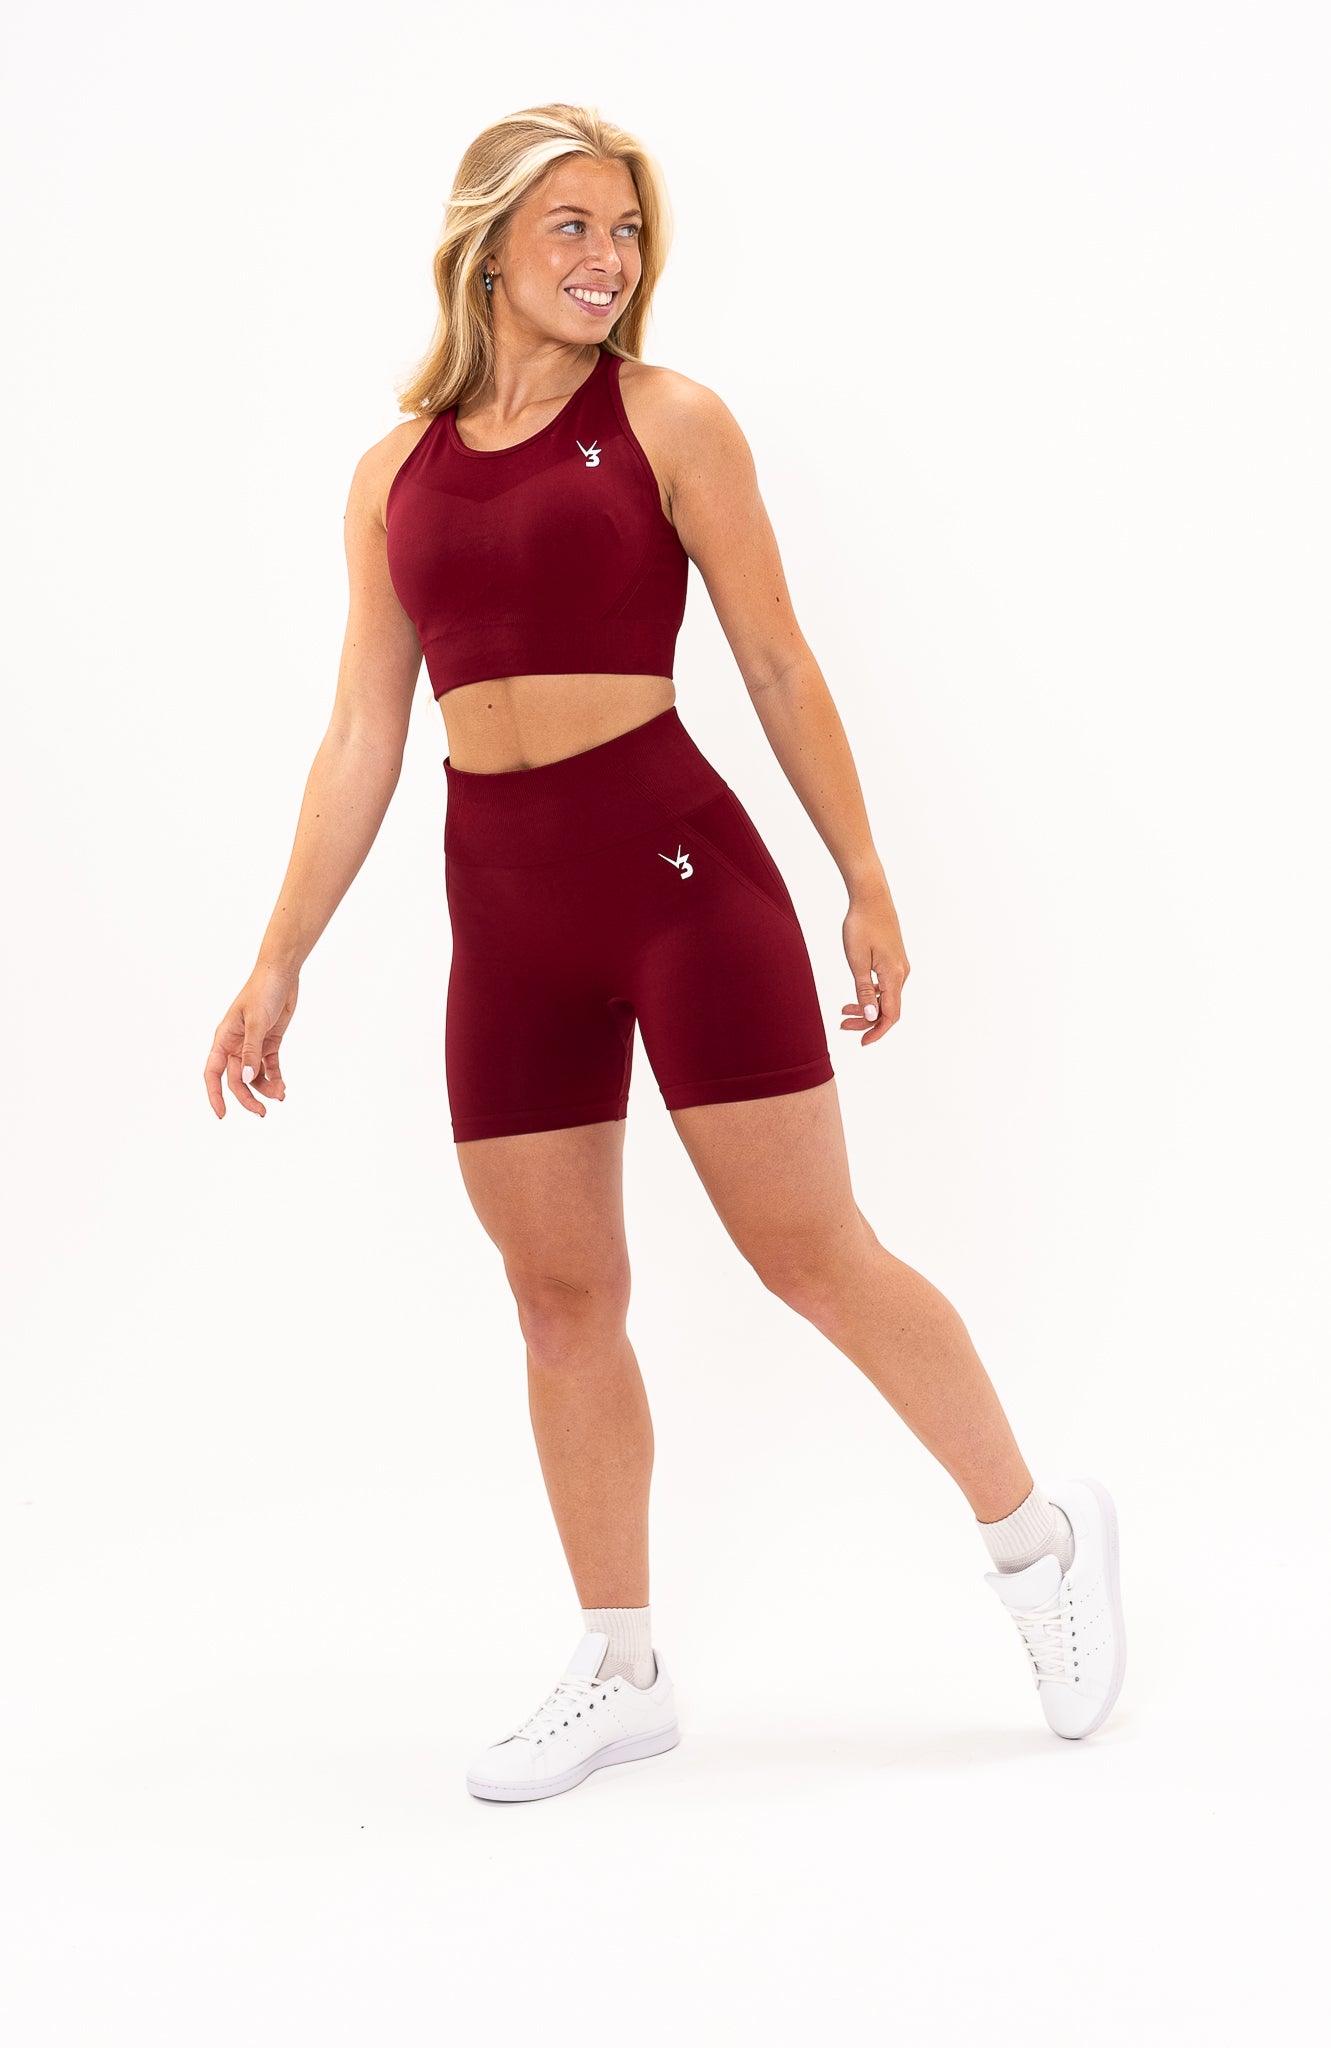 redbaysand Women's Tempo seamless scrunch bum shaping high waisted shorts and training sports bra in burgundy red – Squat proof 5 inch leg cycle shorts and training bra for Gym workouts training, Running, yoga, bodybuilding and bikini fitness.